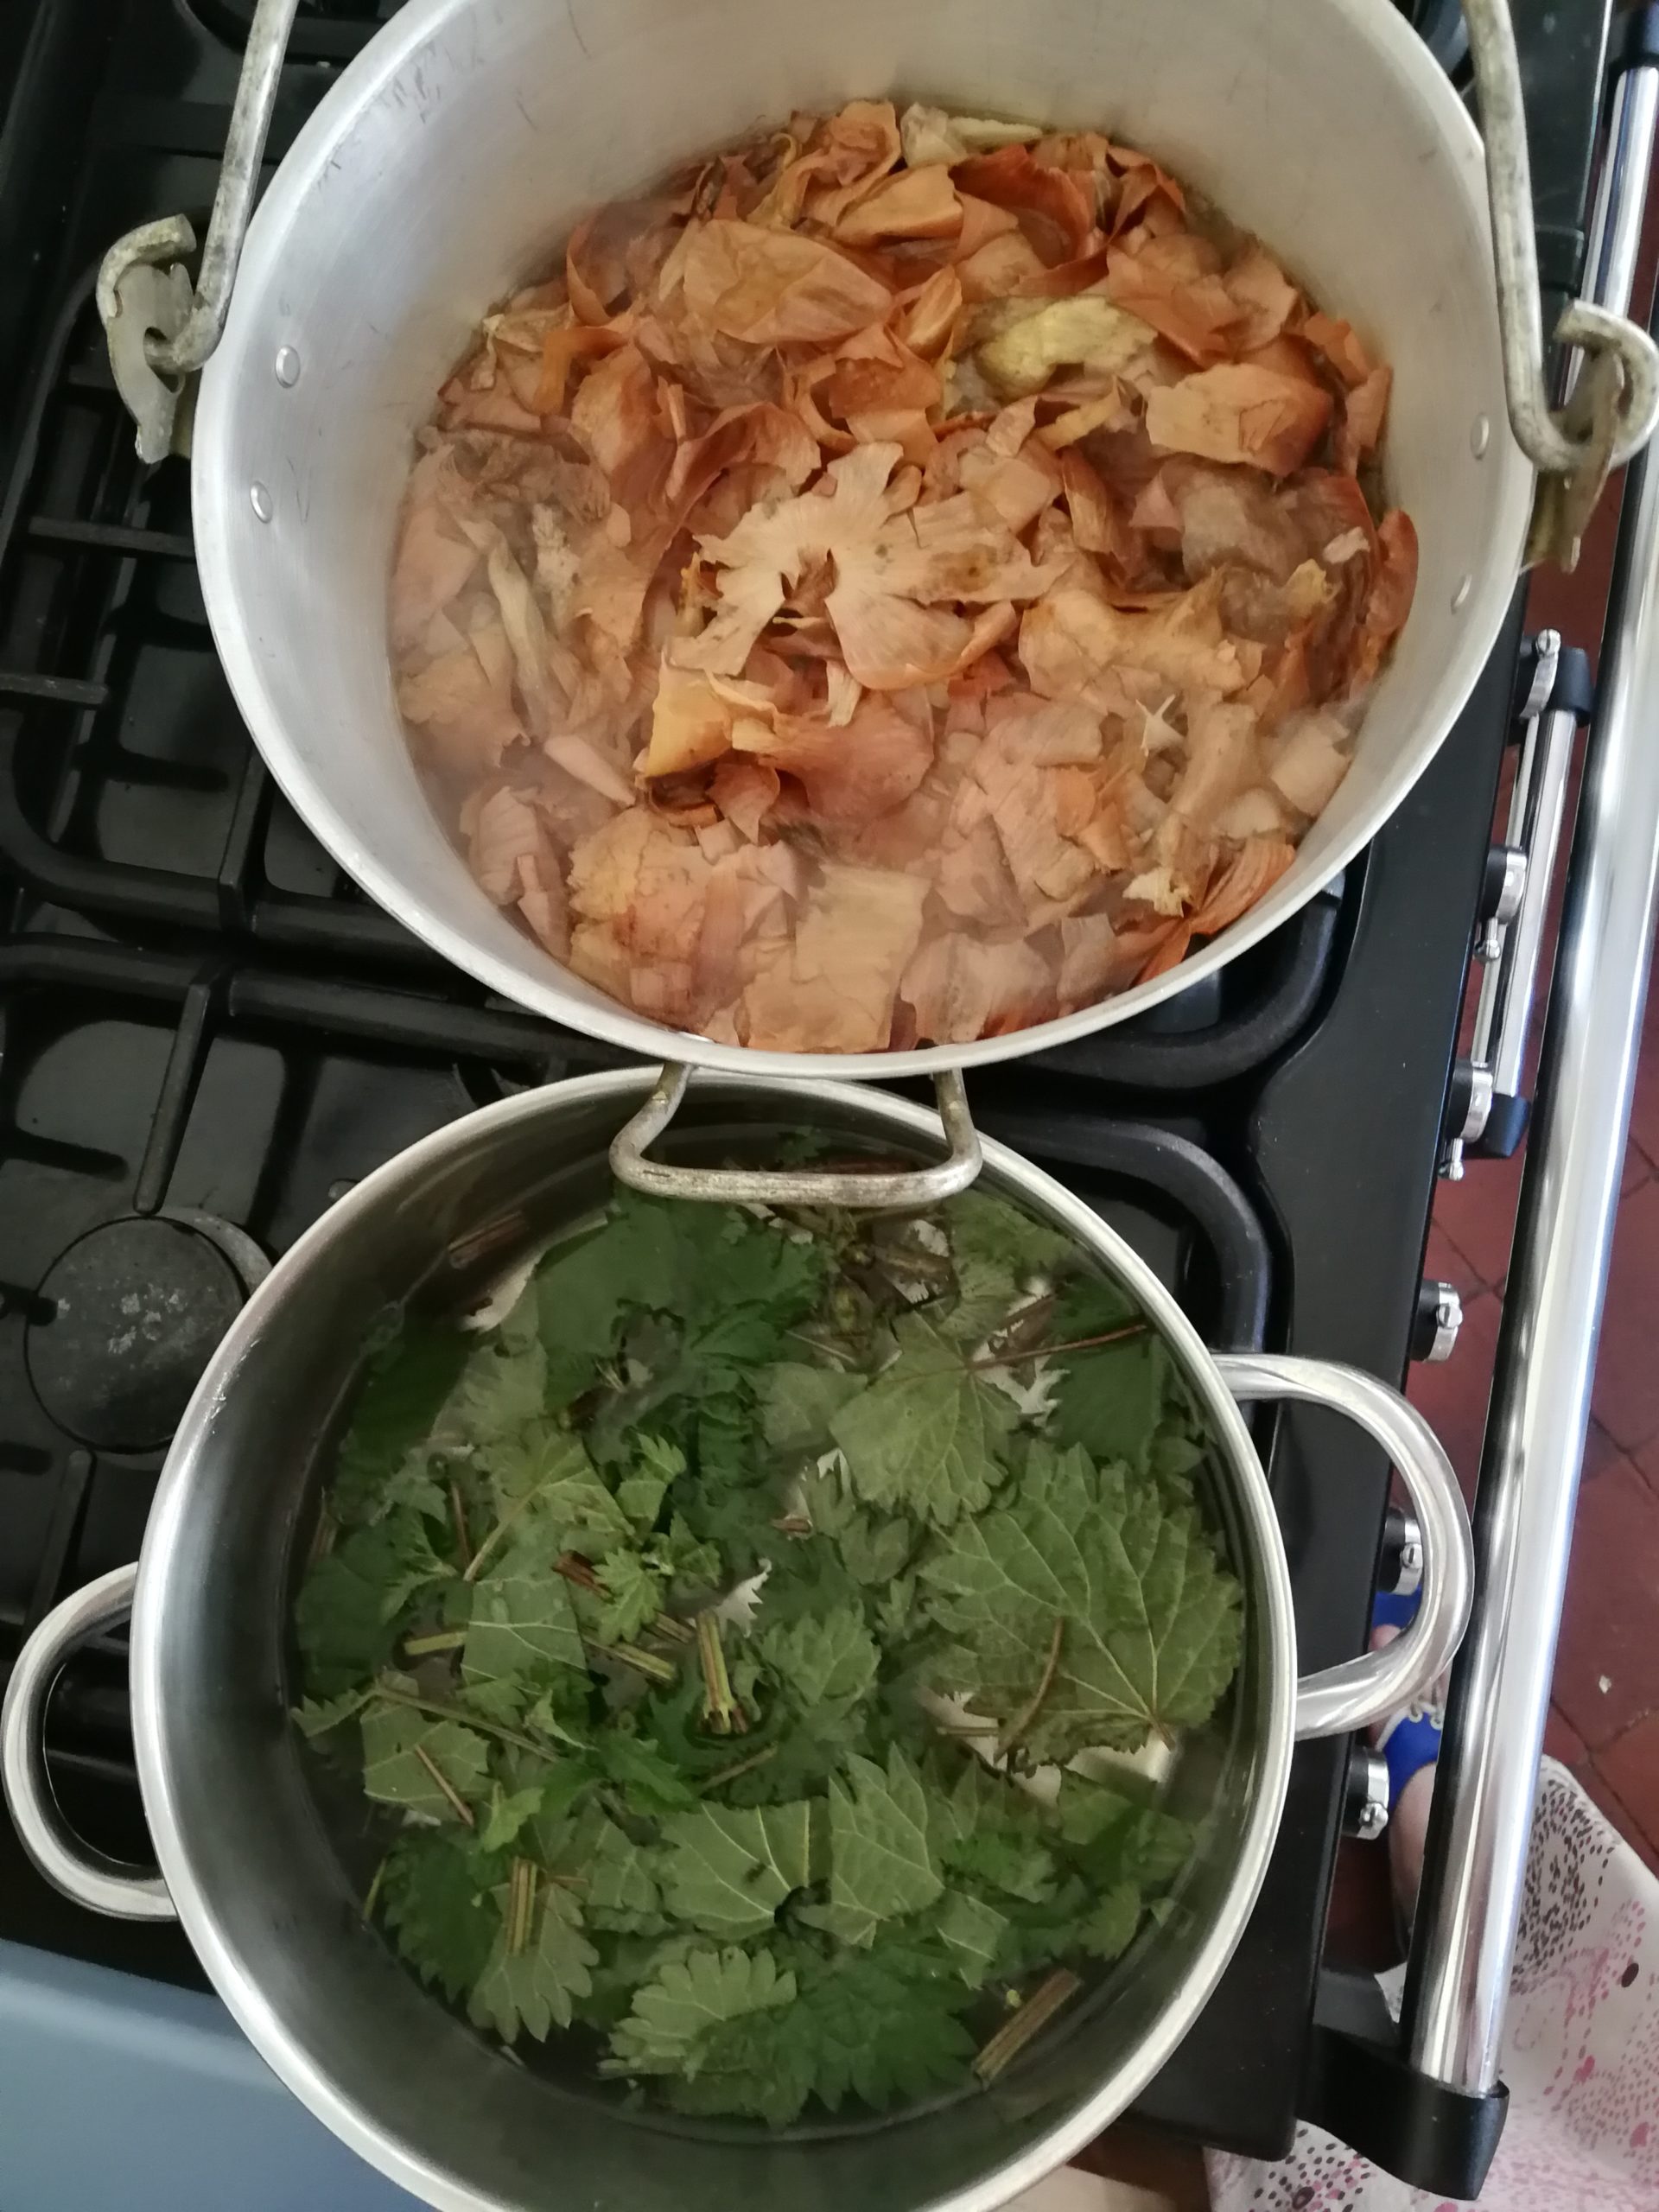 pans of onions and nettles for dying